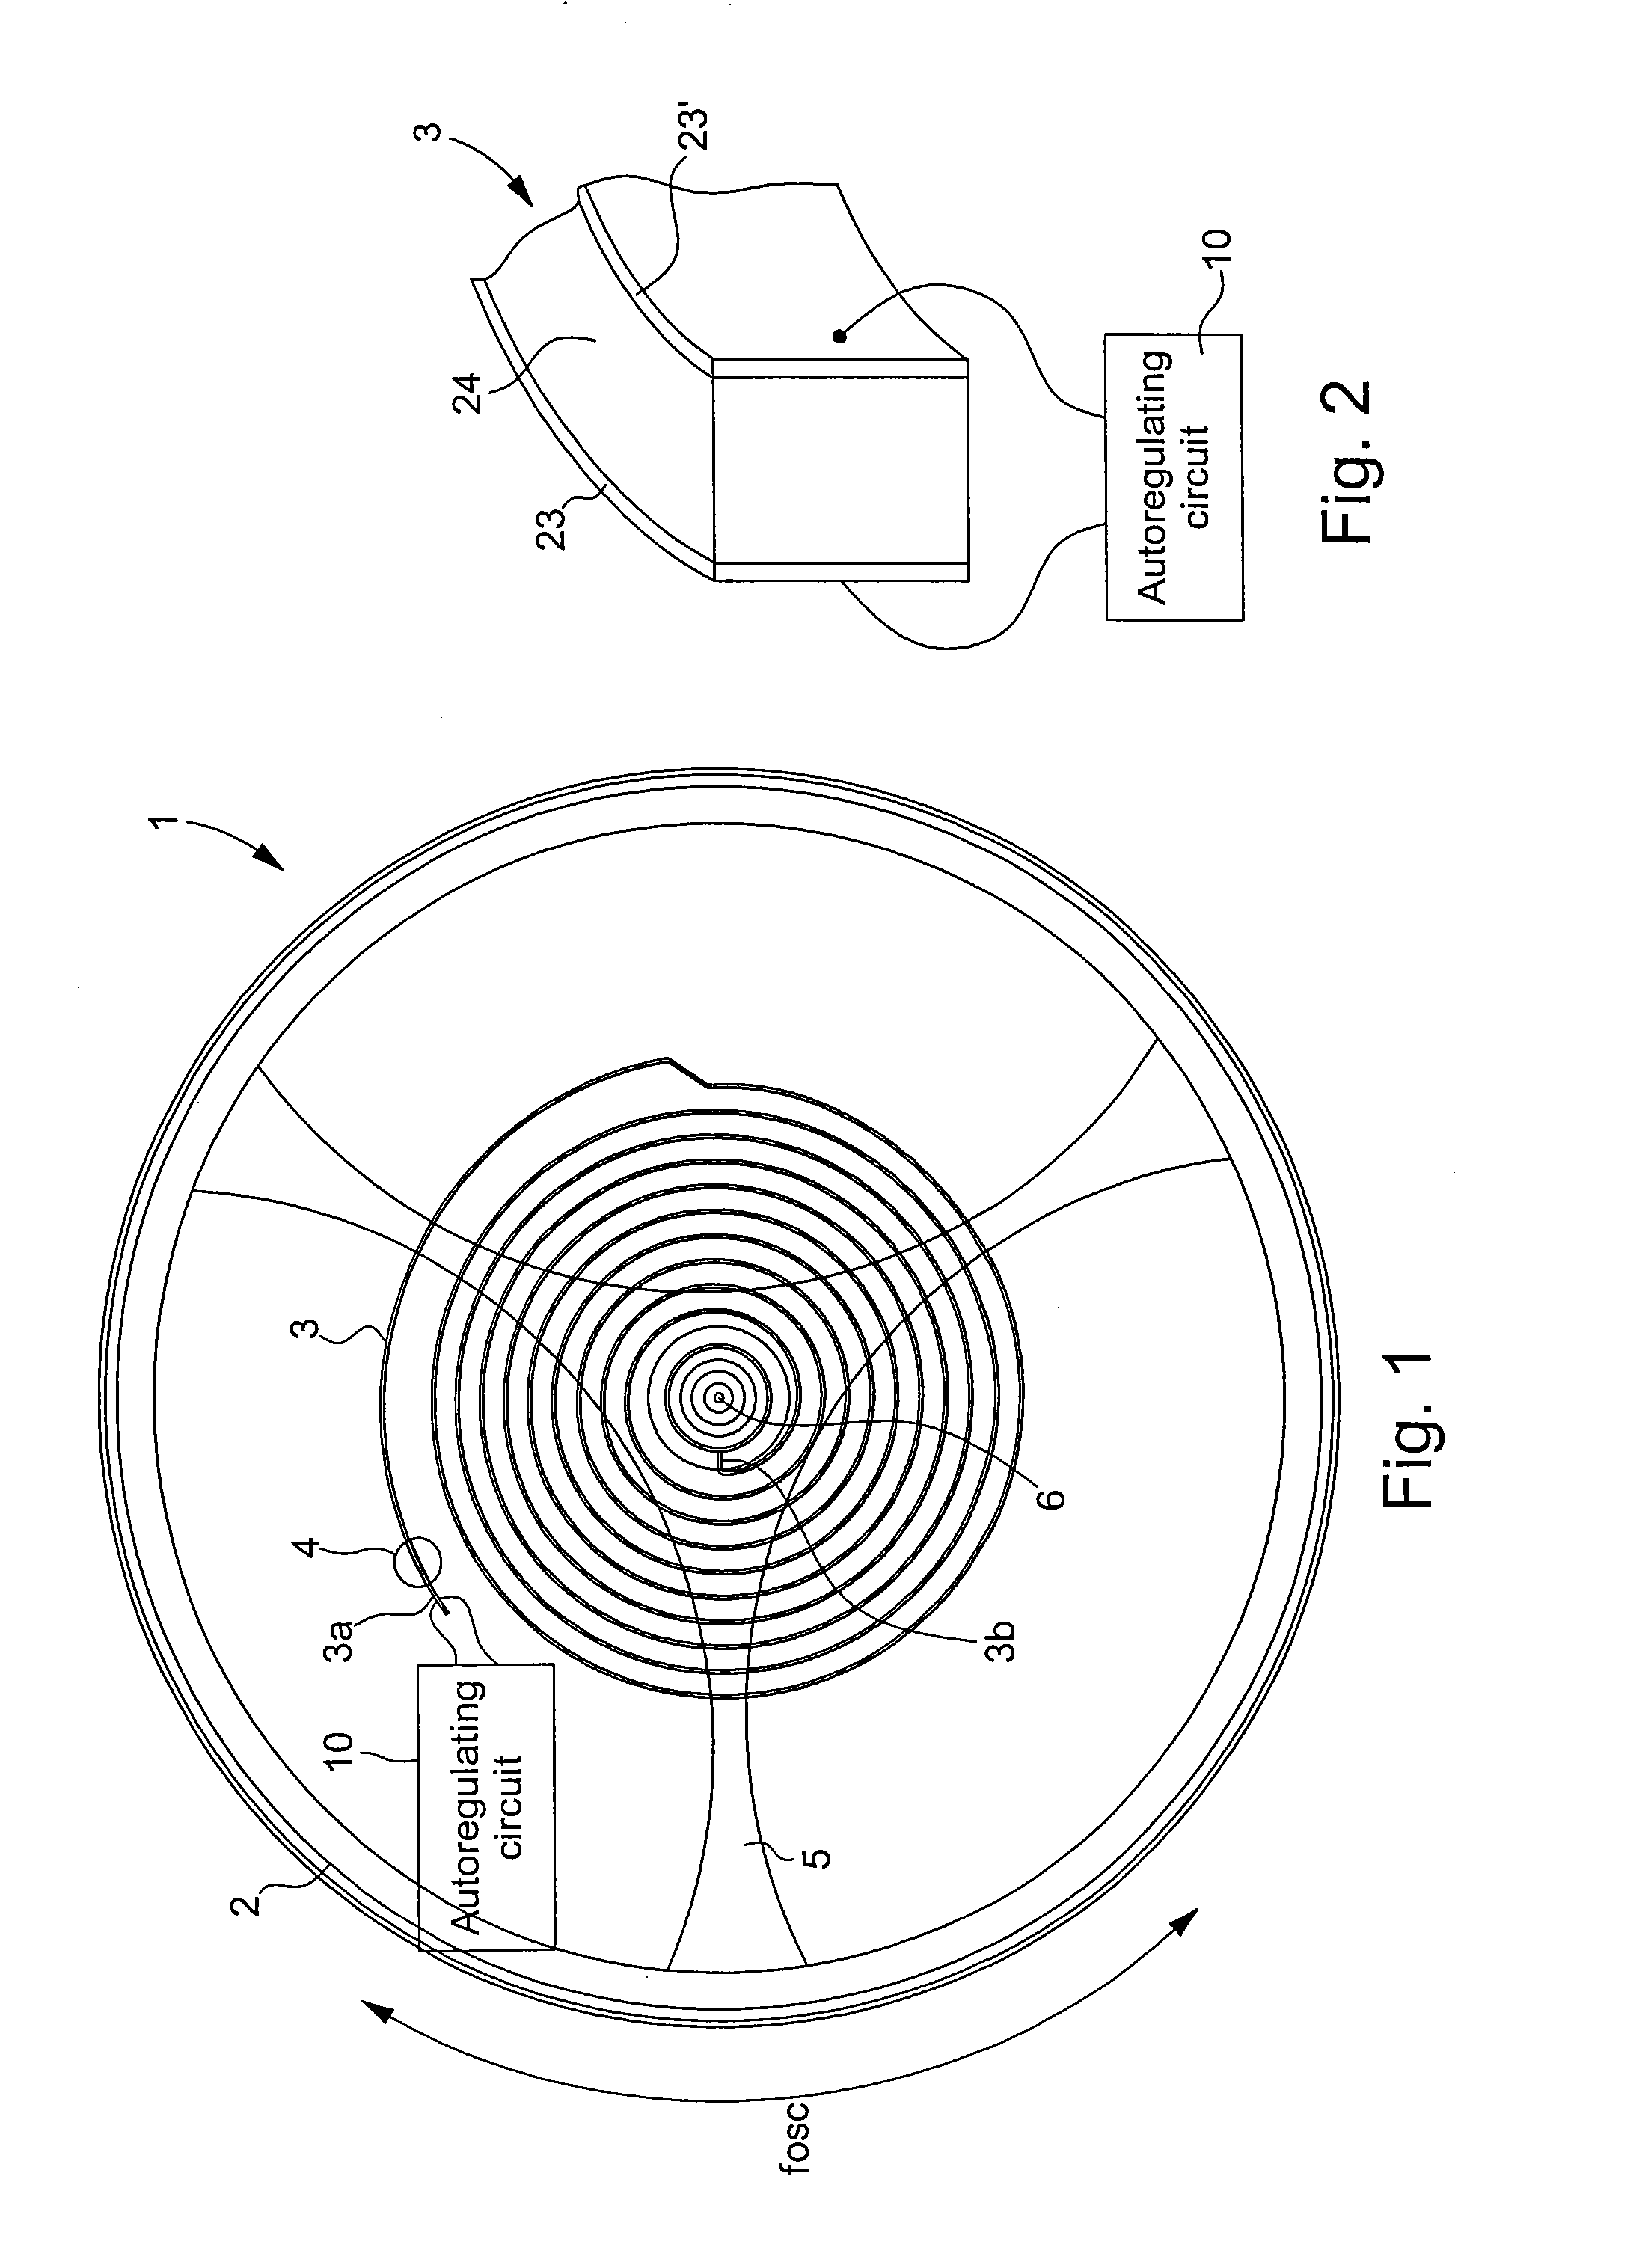 Circuit for autoregulating the oscillation frequency of an oscillating mechanical system and device including the same